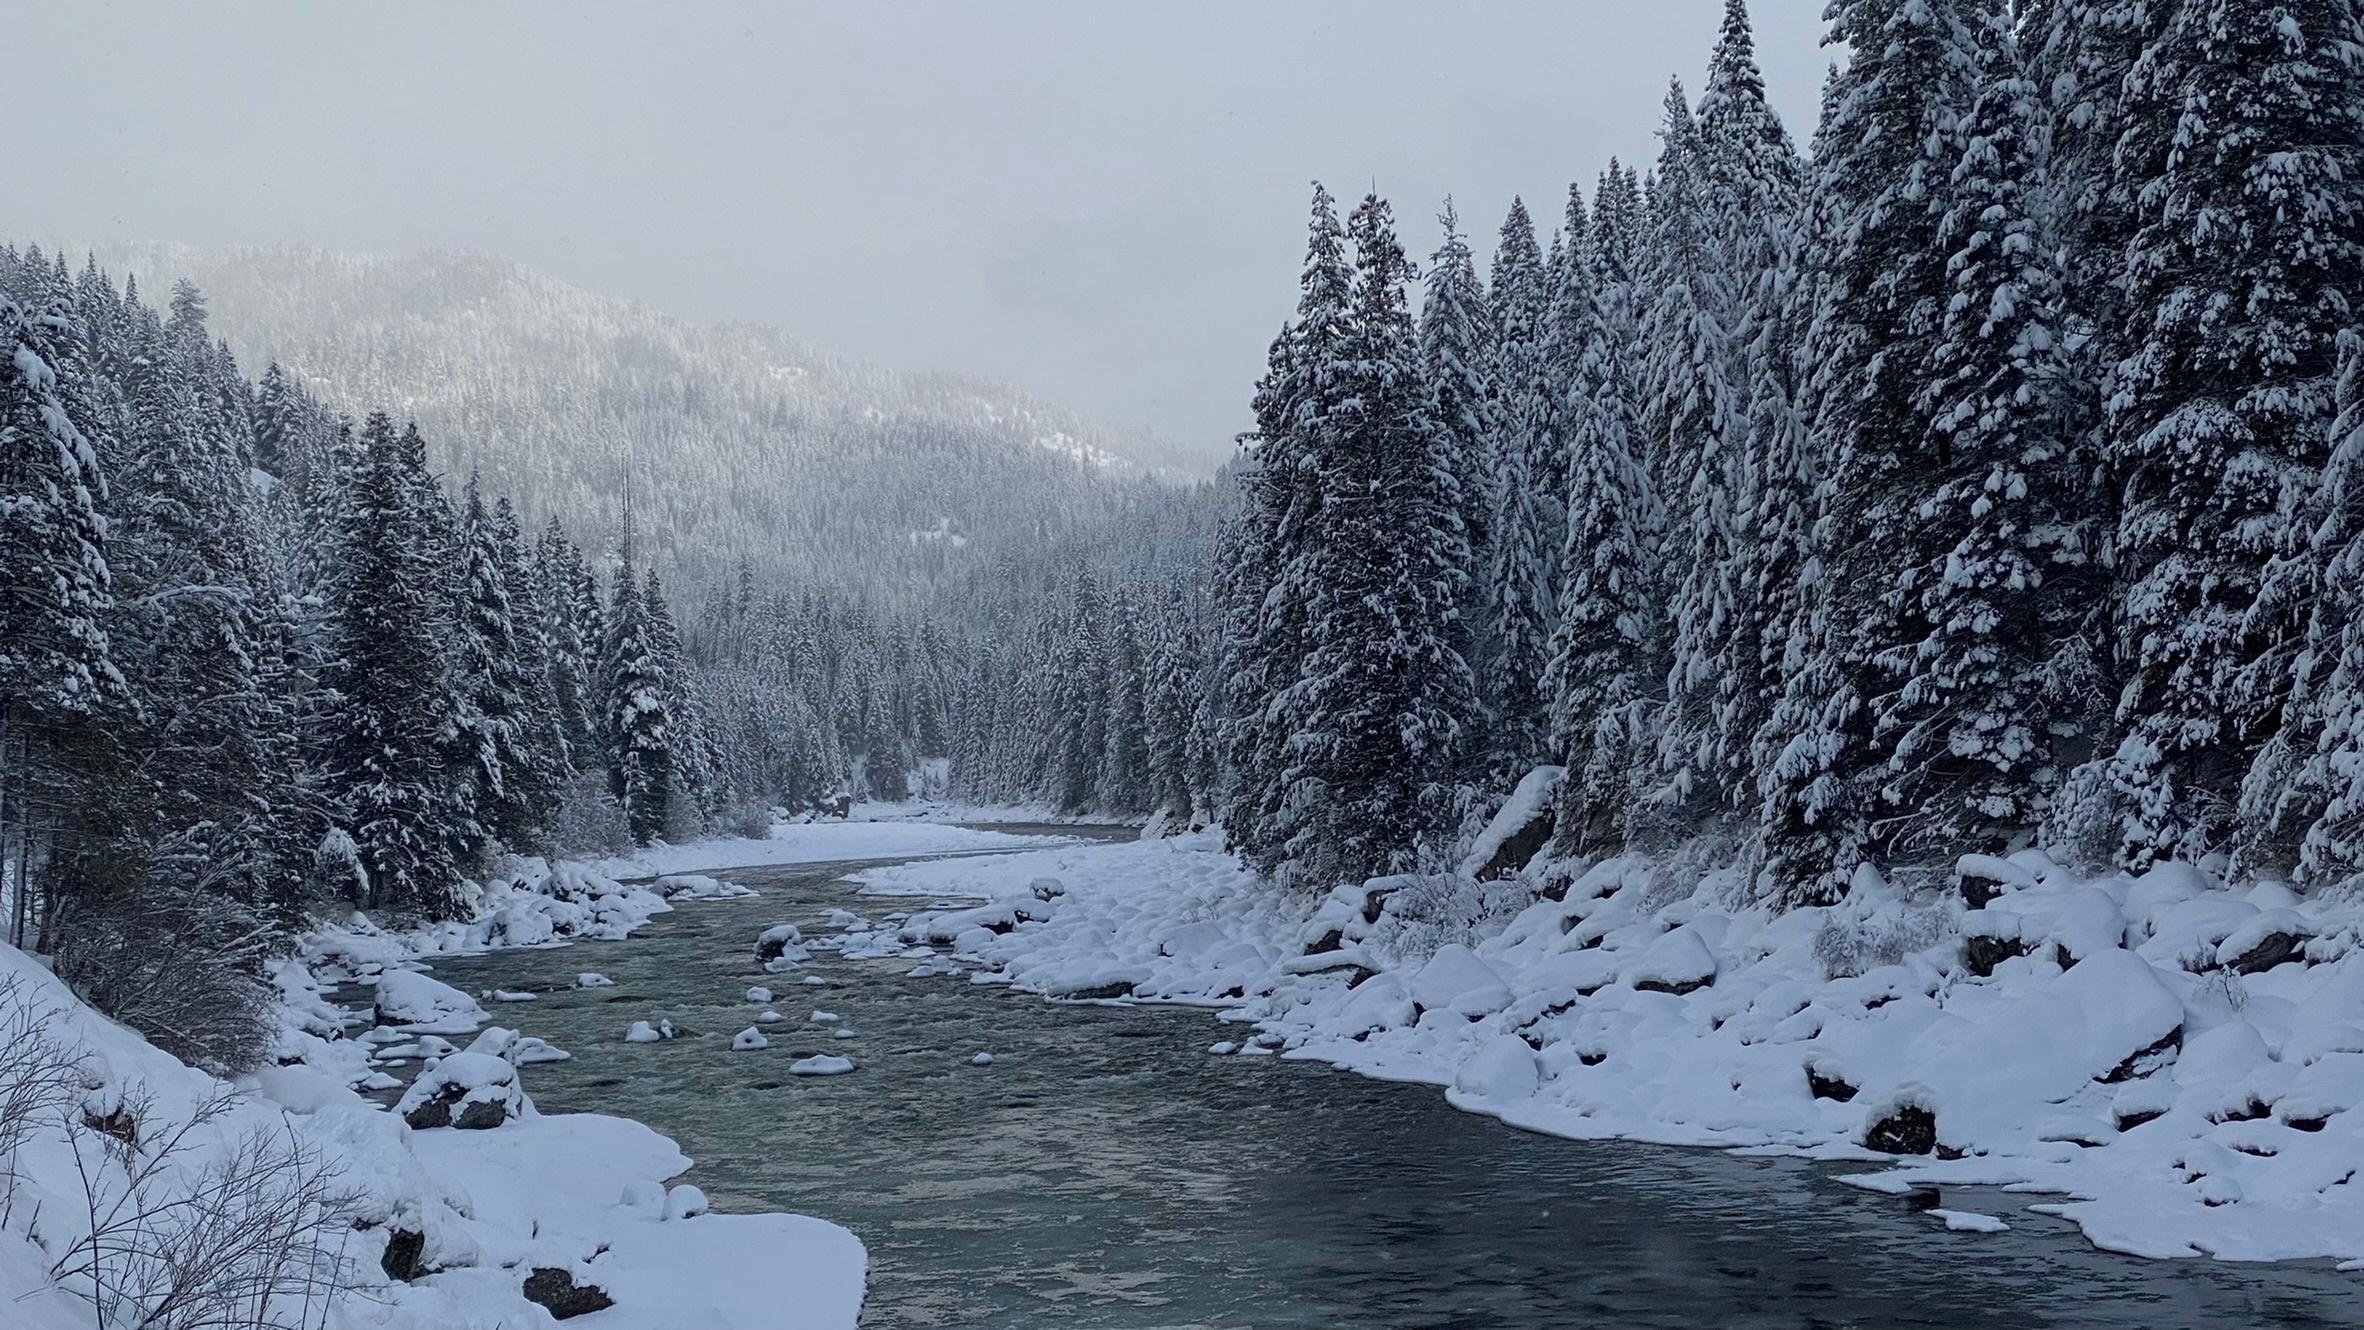 Selway river in the winter